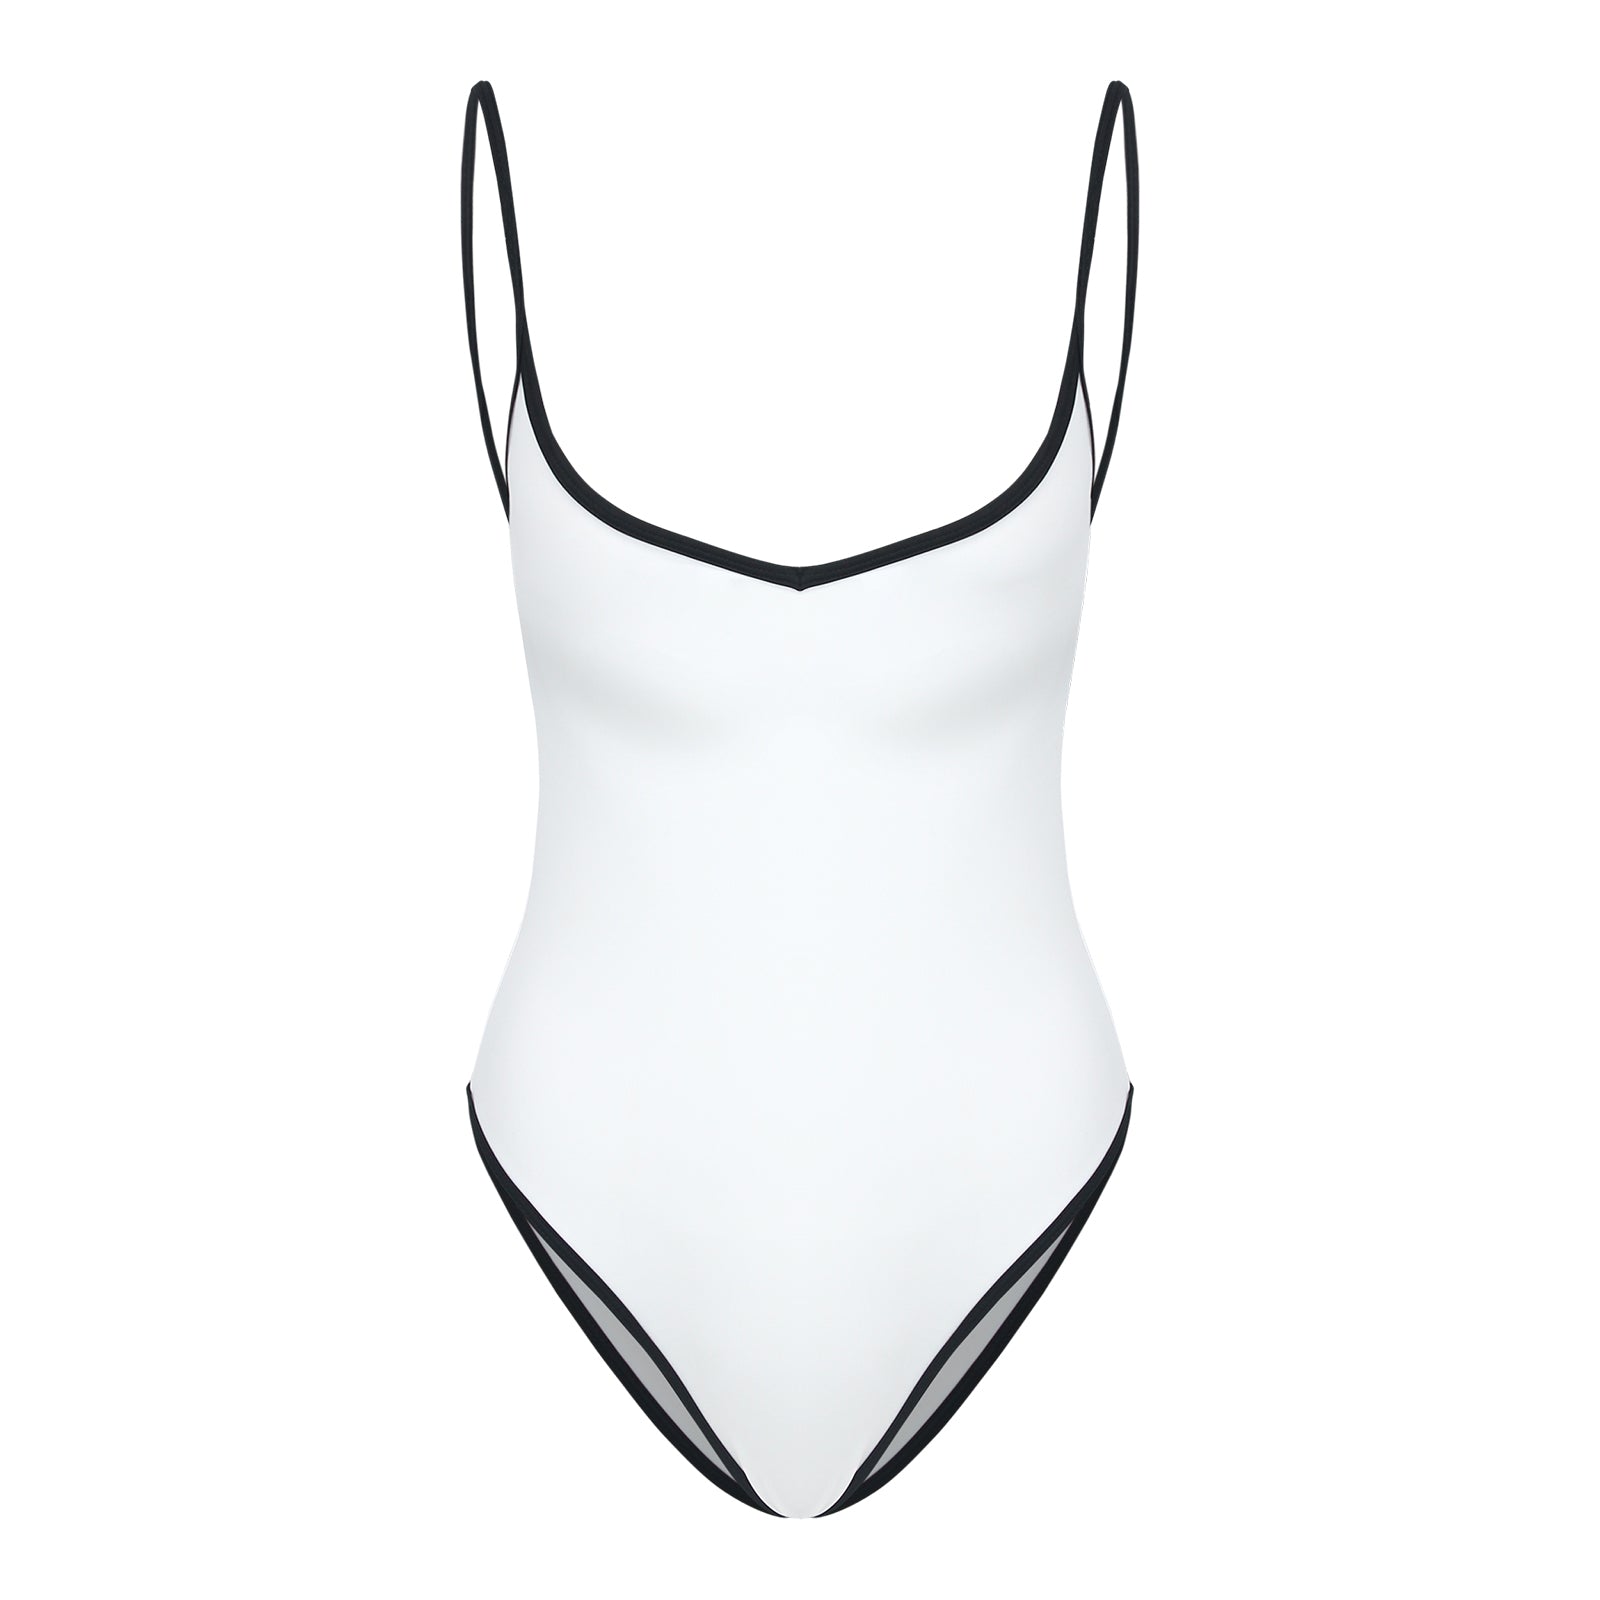 The Coco is a black/white sweetheart neckline one piece swimsuit made with sustainable fabric